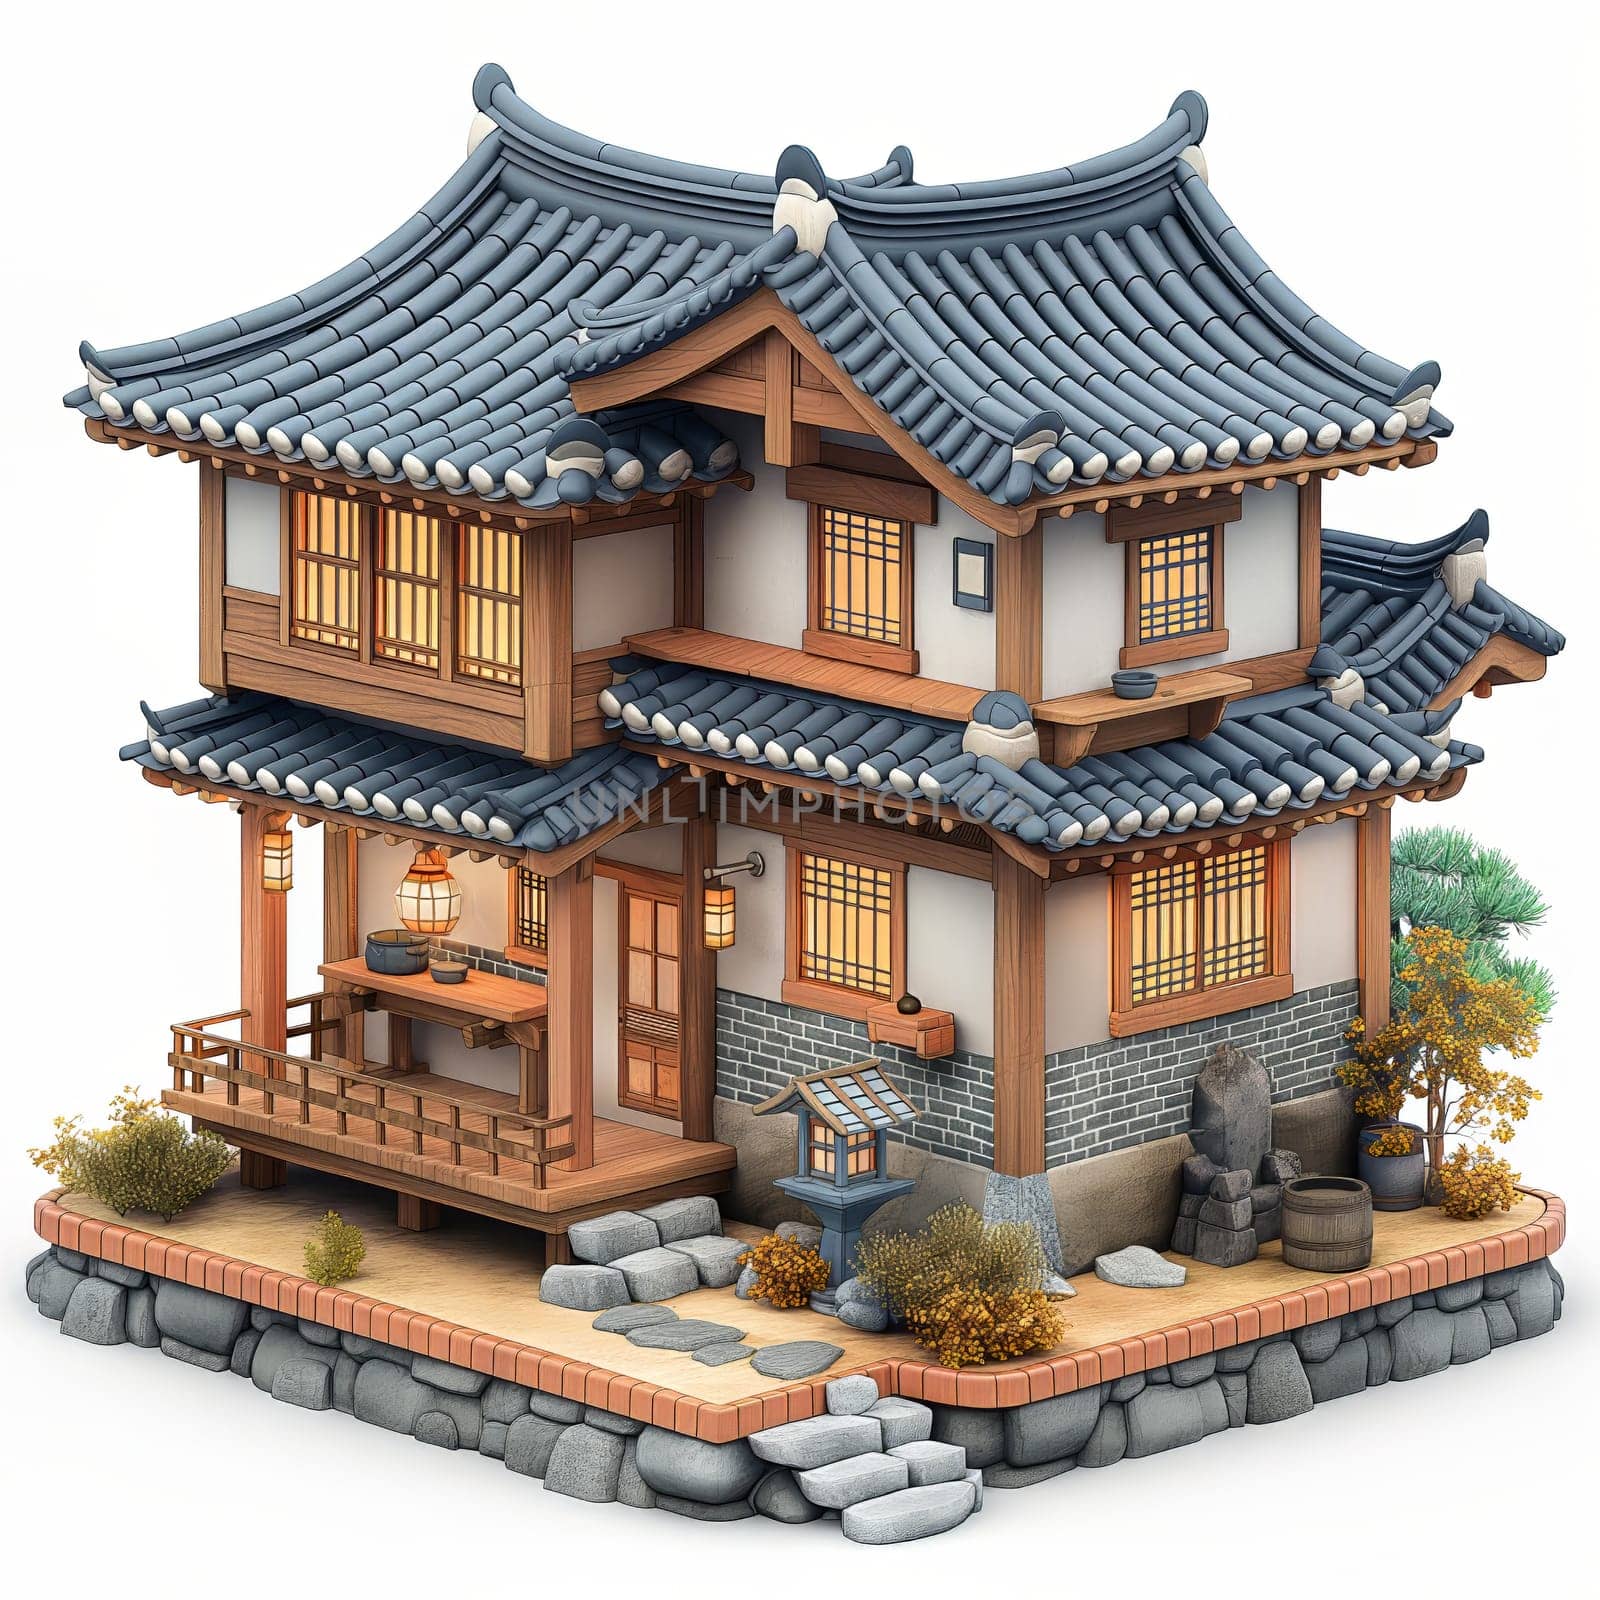 Asian style house model on a white background. by Fischeron